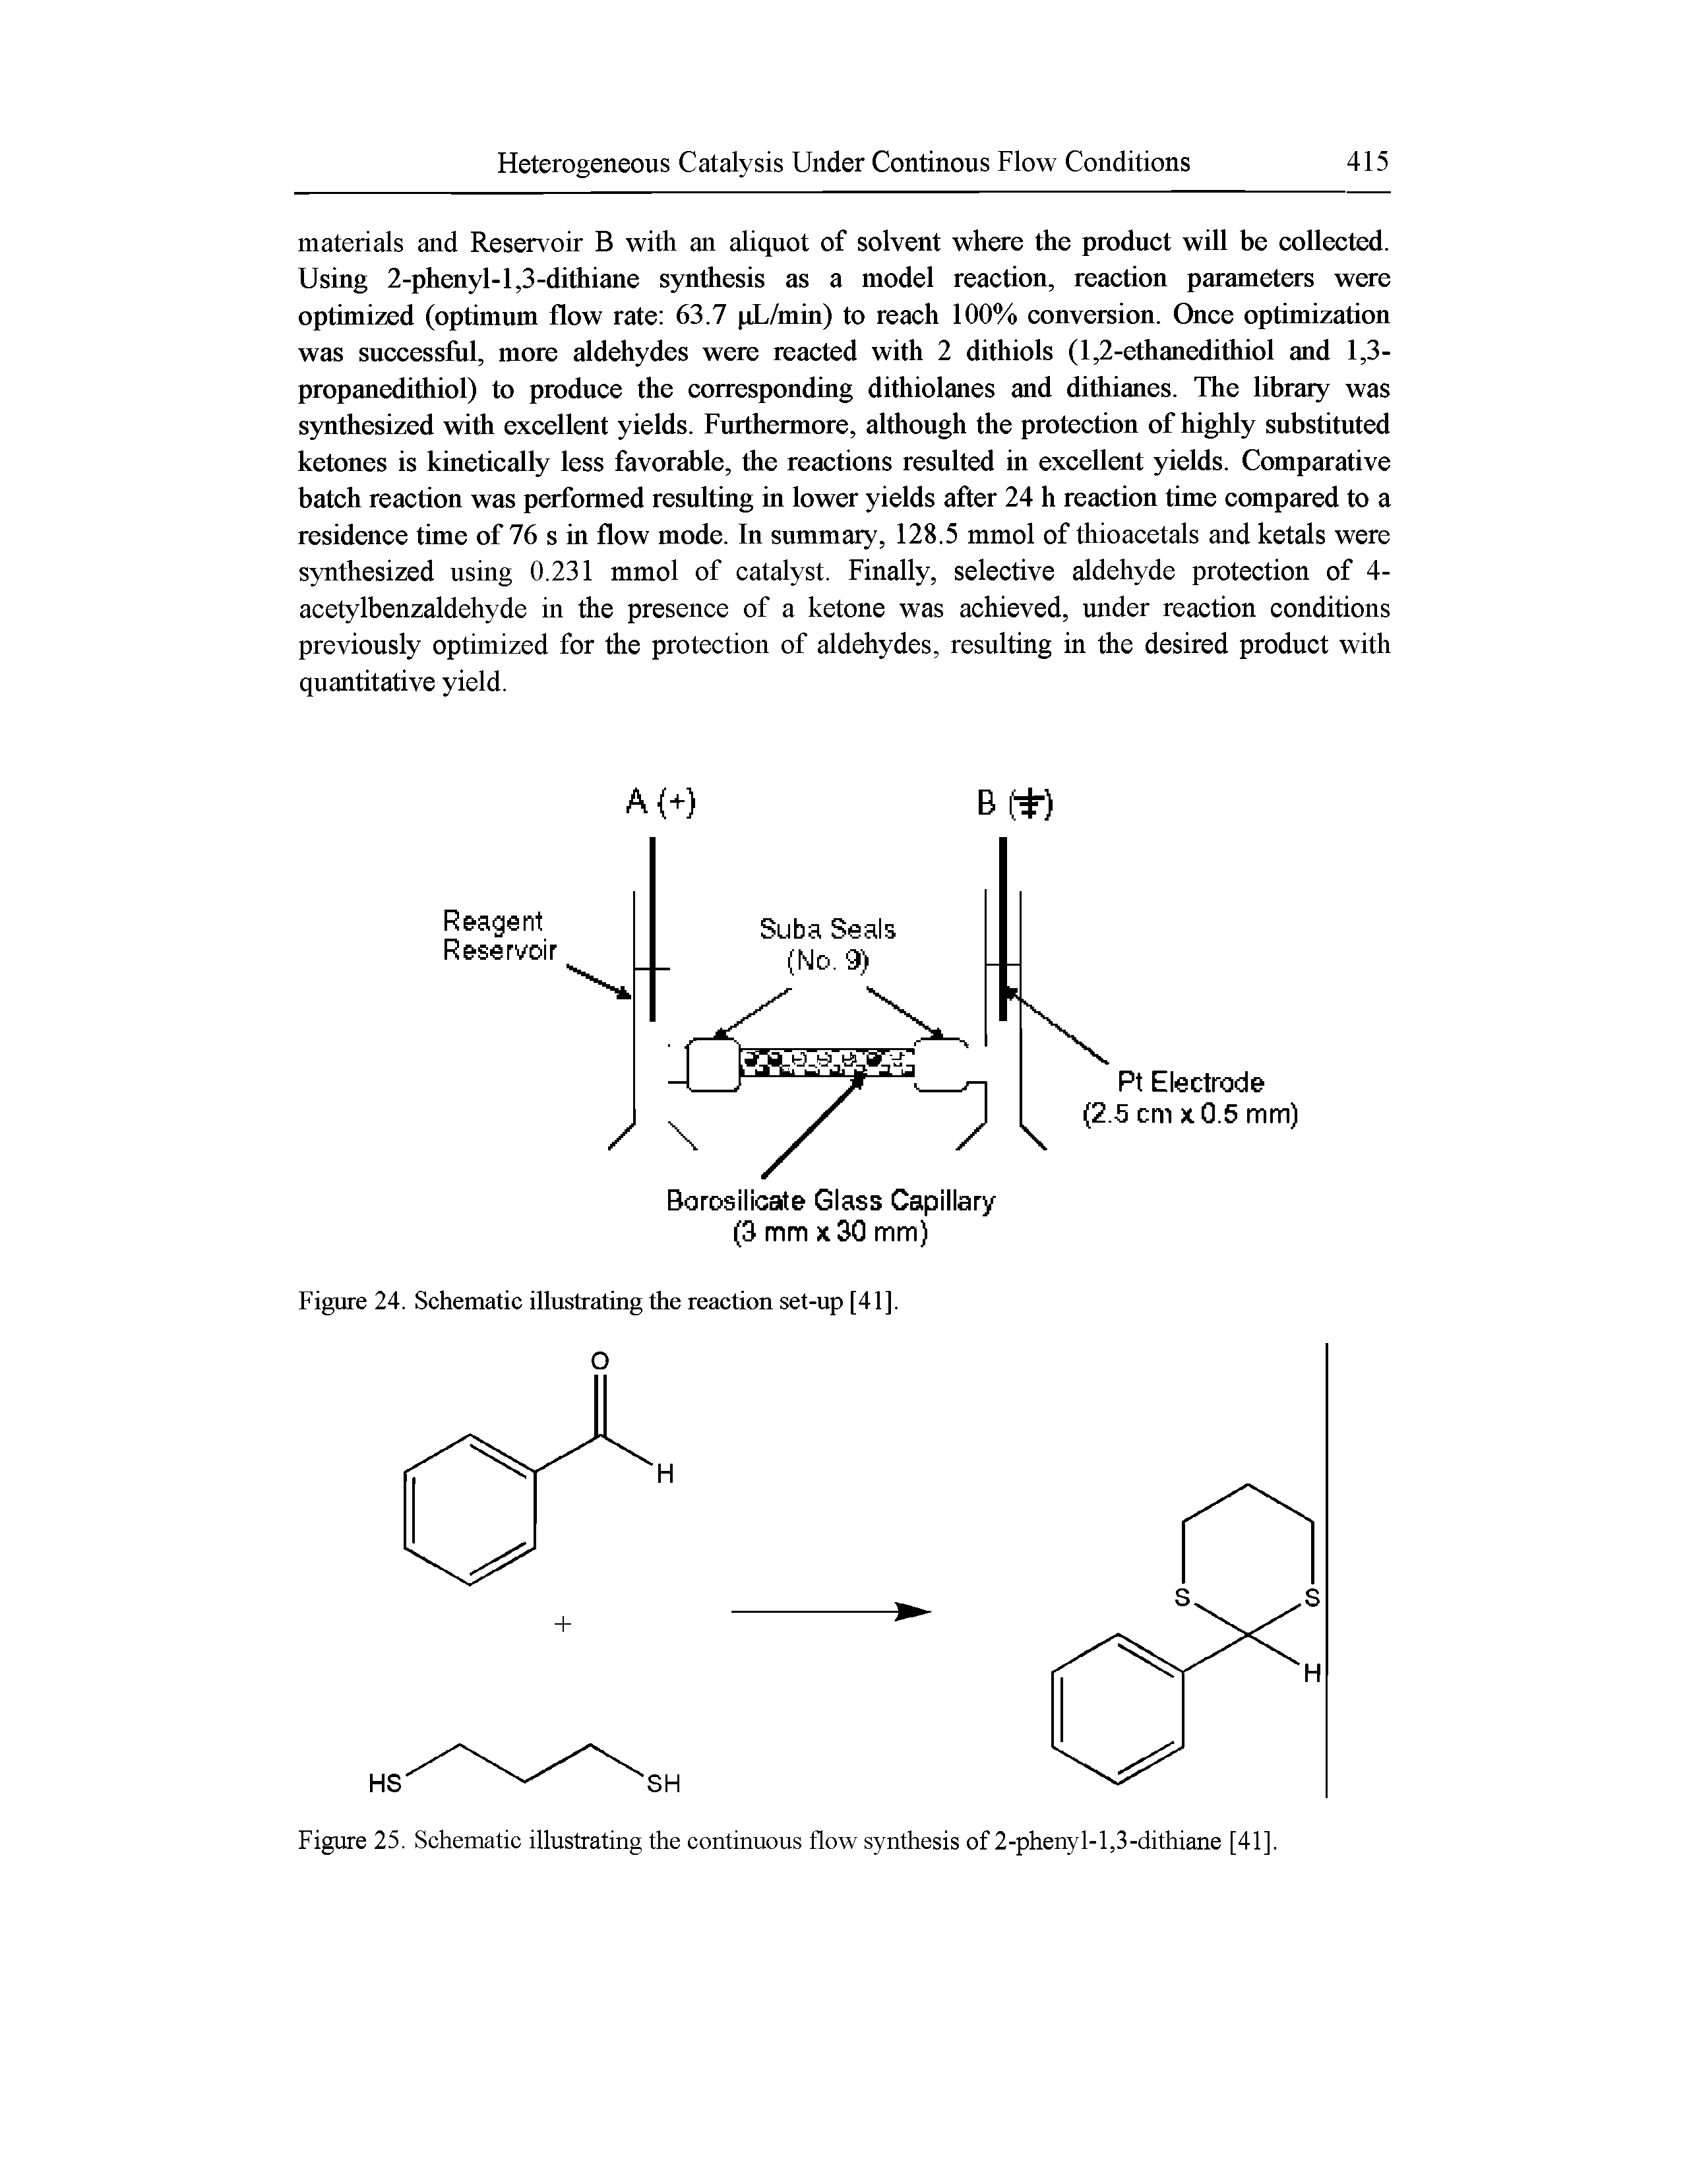 Figure 25. Schematic illustrating the continuous flow synthesis of 2-phenyl-l,3-dithiane [41],...